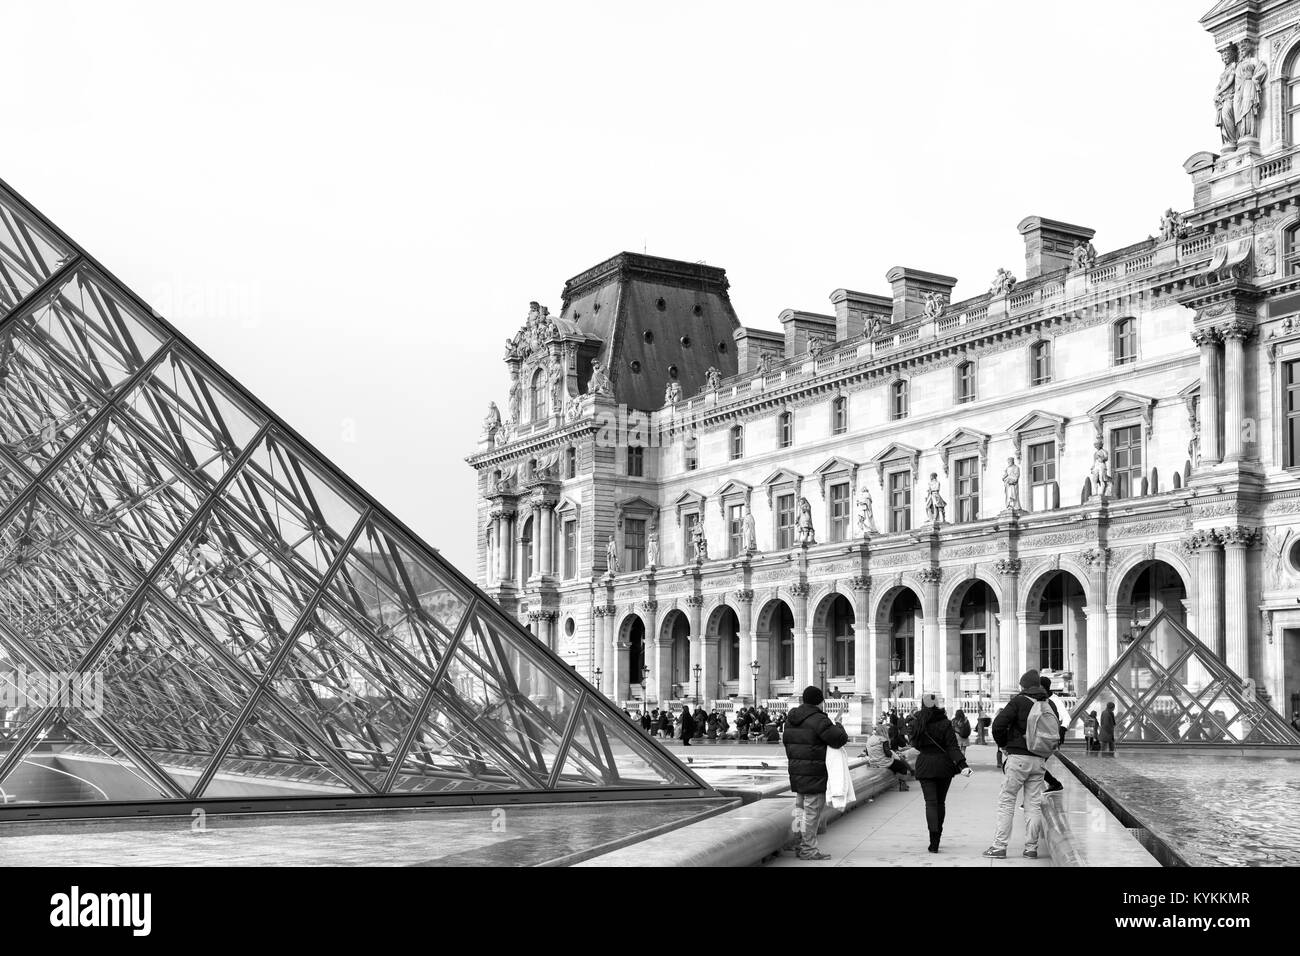 PARIS-Jan 5, 2014: Louvre Museum courtyard and glass pyramid. Black and white daytime image. Stock Photo